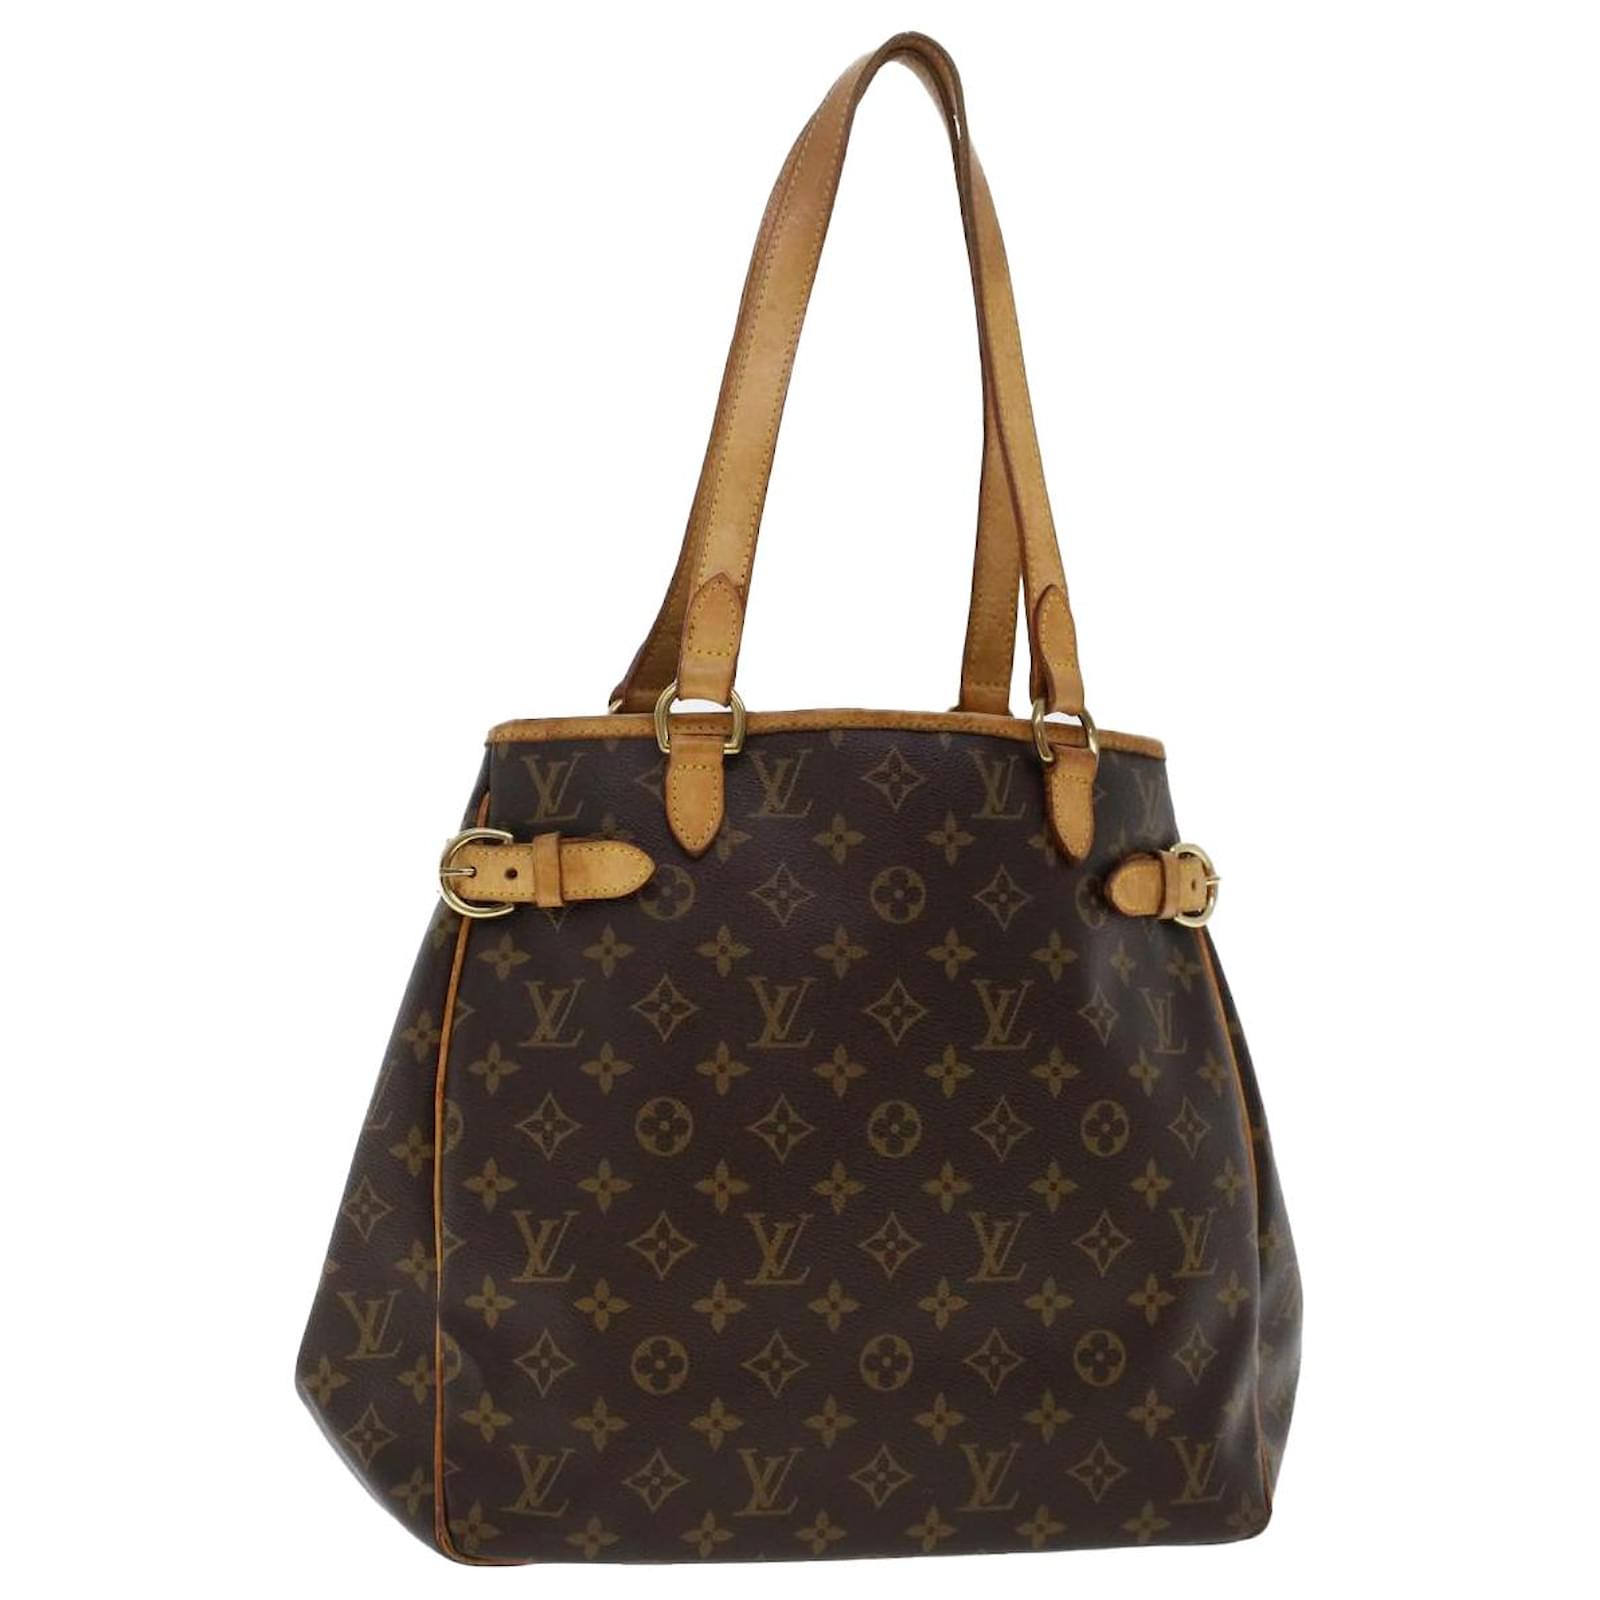 LOUIS VUITTON Monogramm Totally PM Tote Bag M56688 LV Auth bs4460